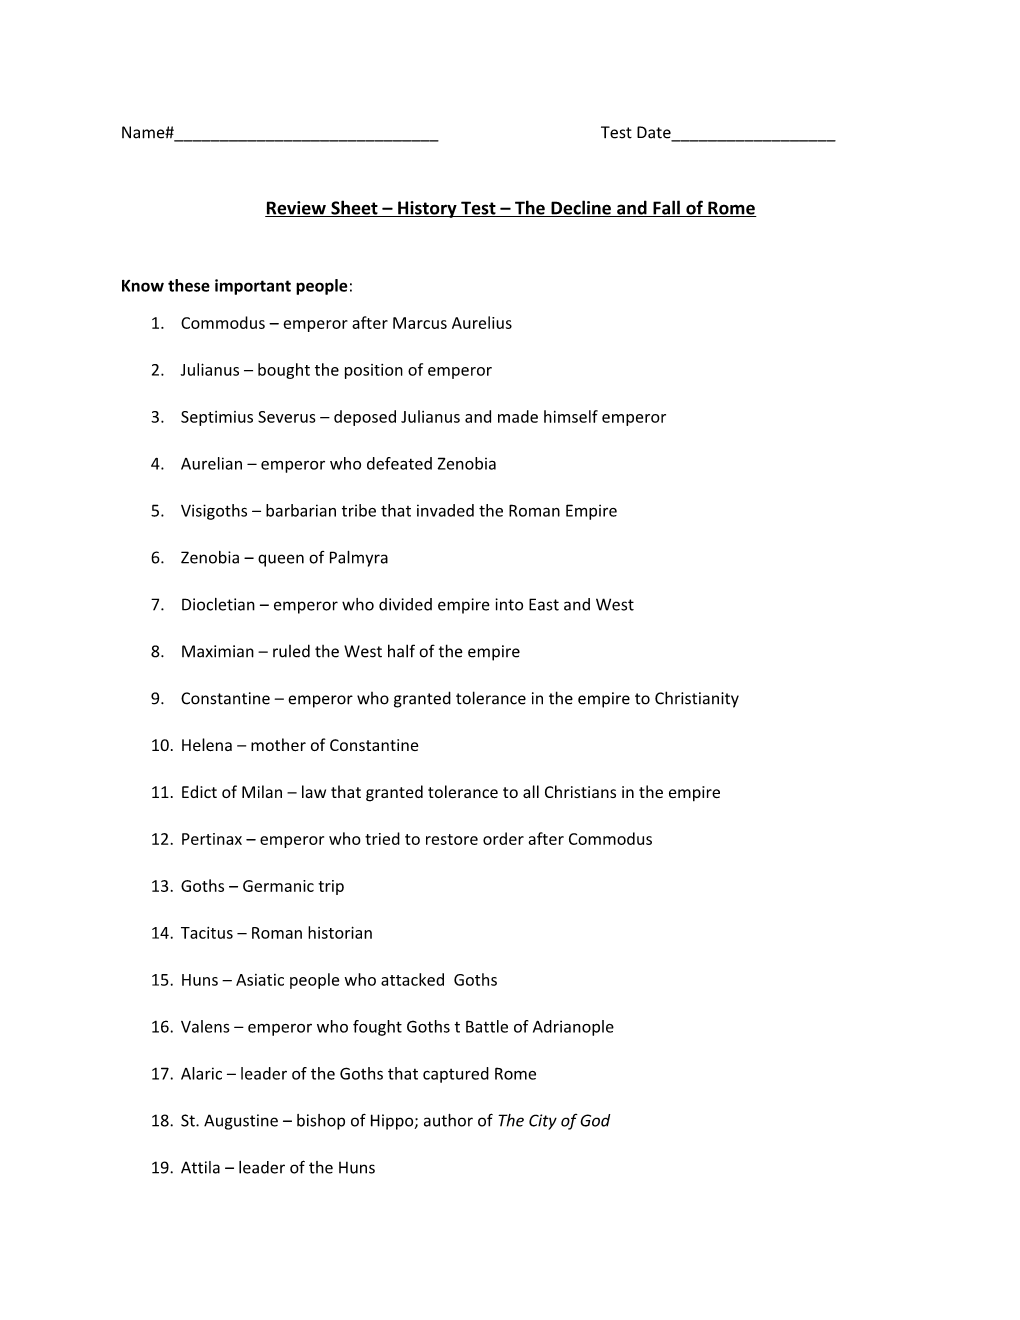 Review Sheet History Test the Decline and Fall of Rome